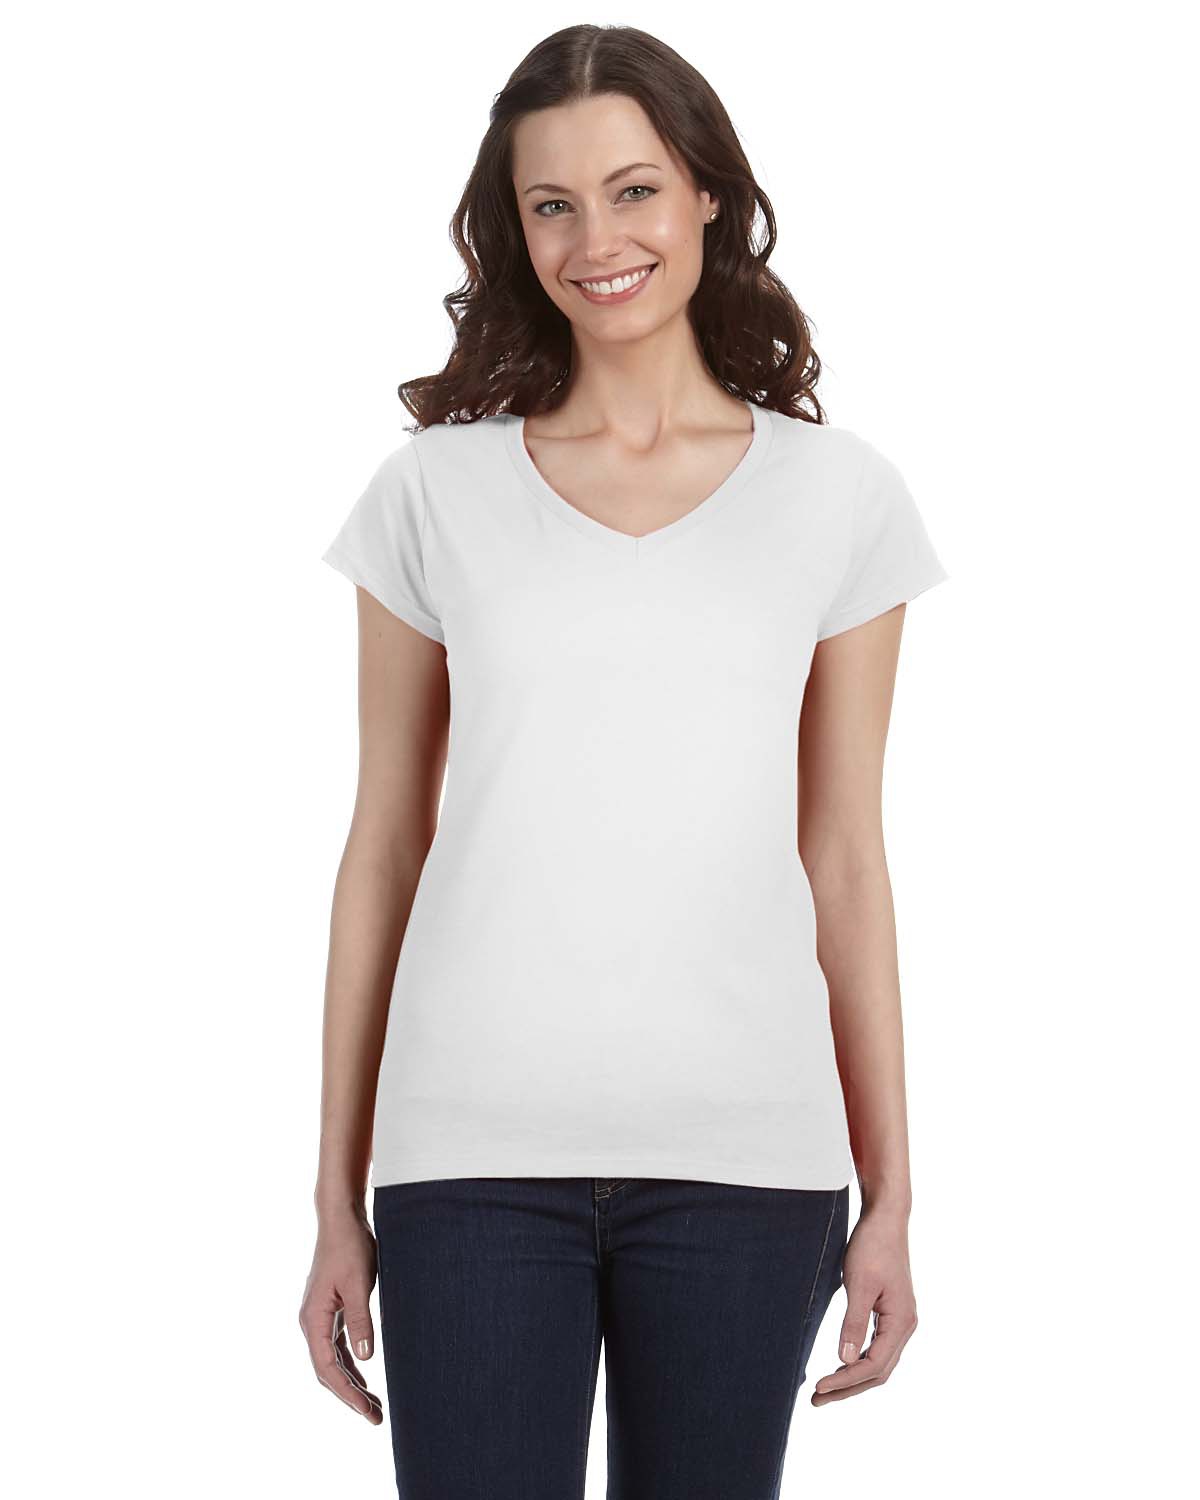 'Gildan G64VL Ladies SoftStyle Fitted V-Neck T-Shirt'